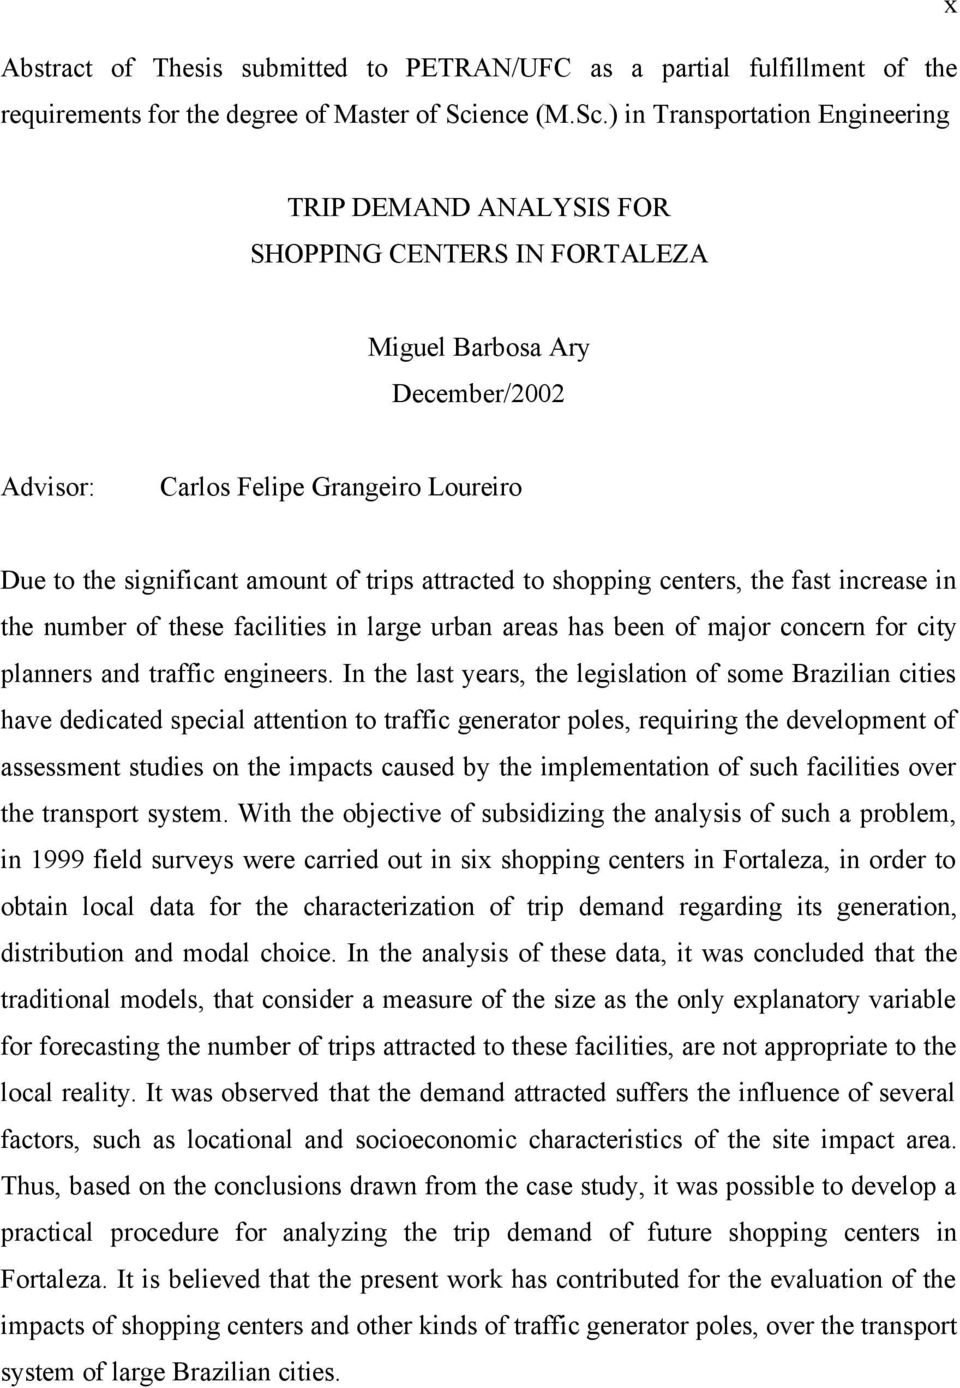 ) in Transportation Engineering x TRIP DEMAND ANALYSIS FOR SHOPPING CENTERS IN FORTALEZA Miguel Barbosa Ary December/2002 Advisor: Carlos Felipe Grangeiro Loureiro Due to the significant amount of